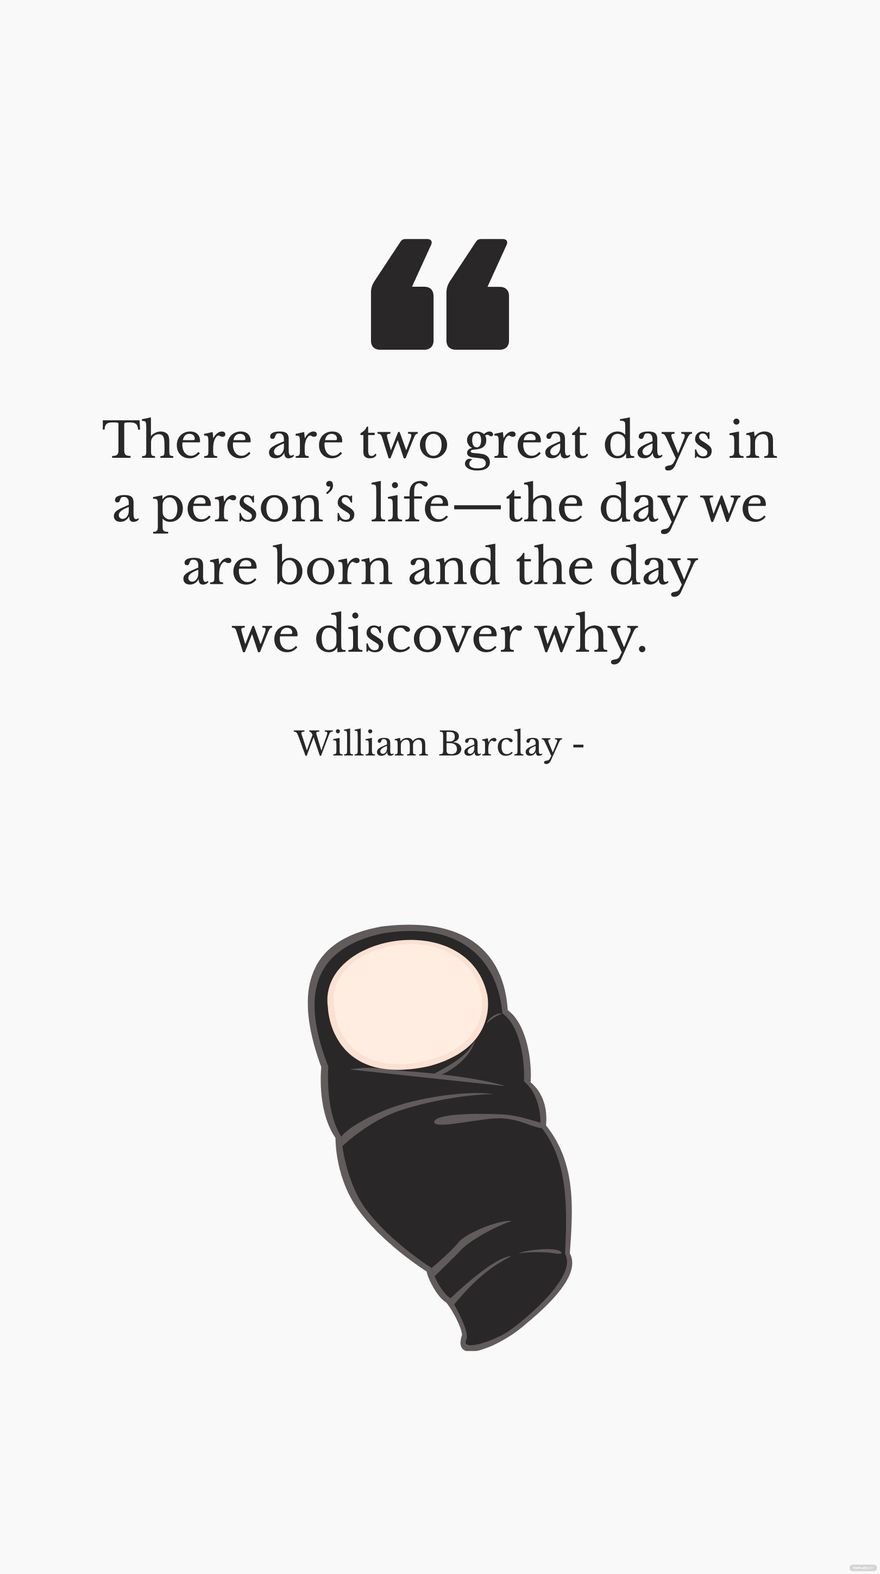 William Barclay - There are two great days in a person’s life—the day we are born and the day we discover why.